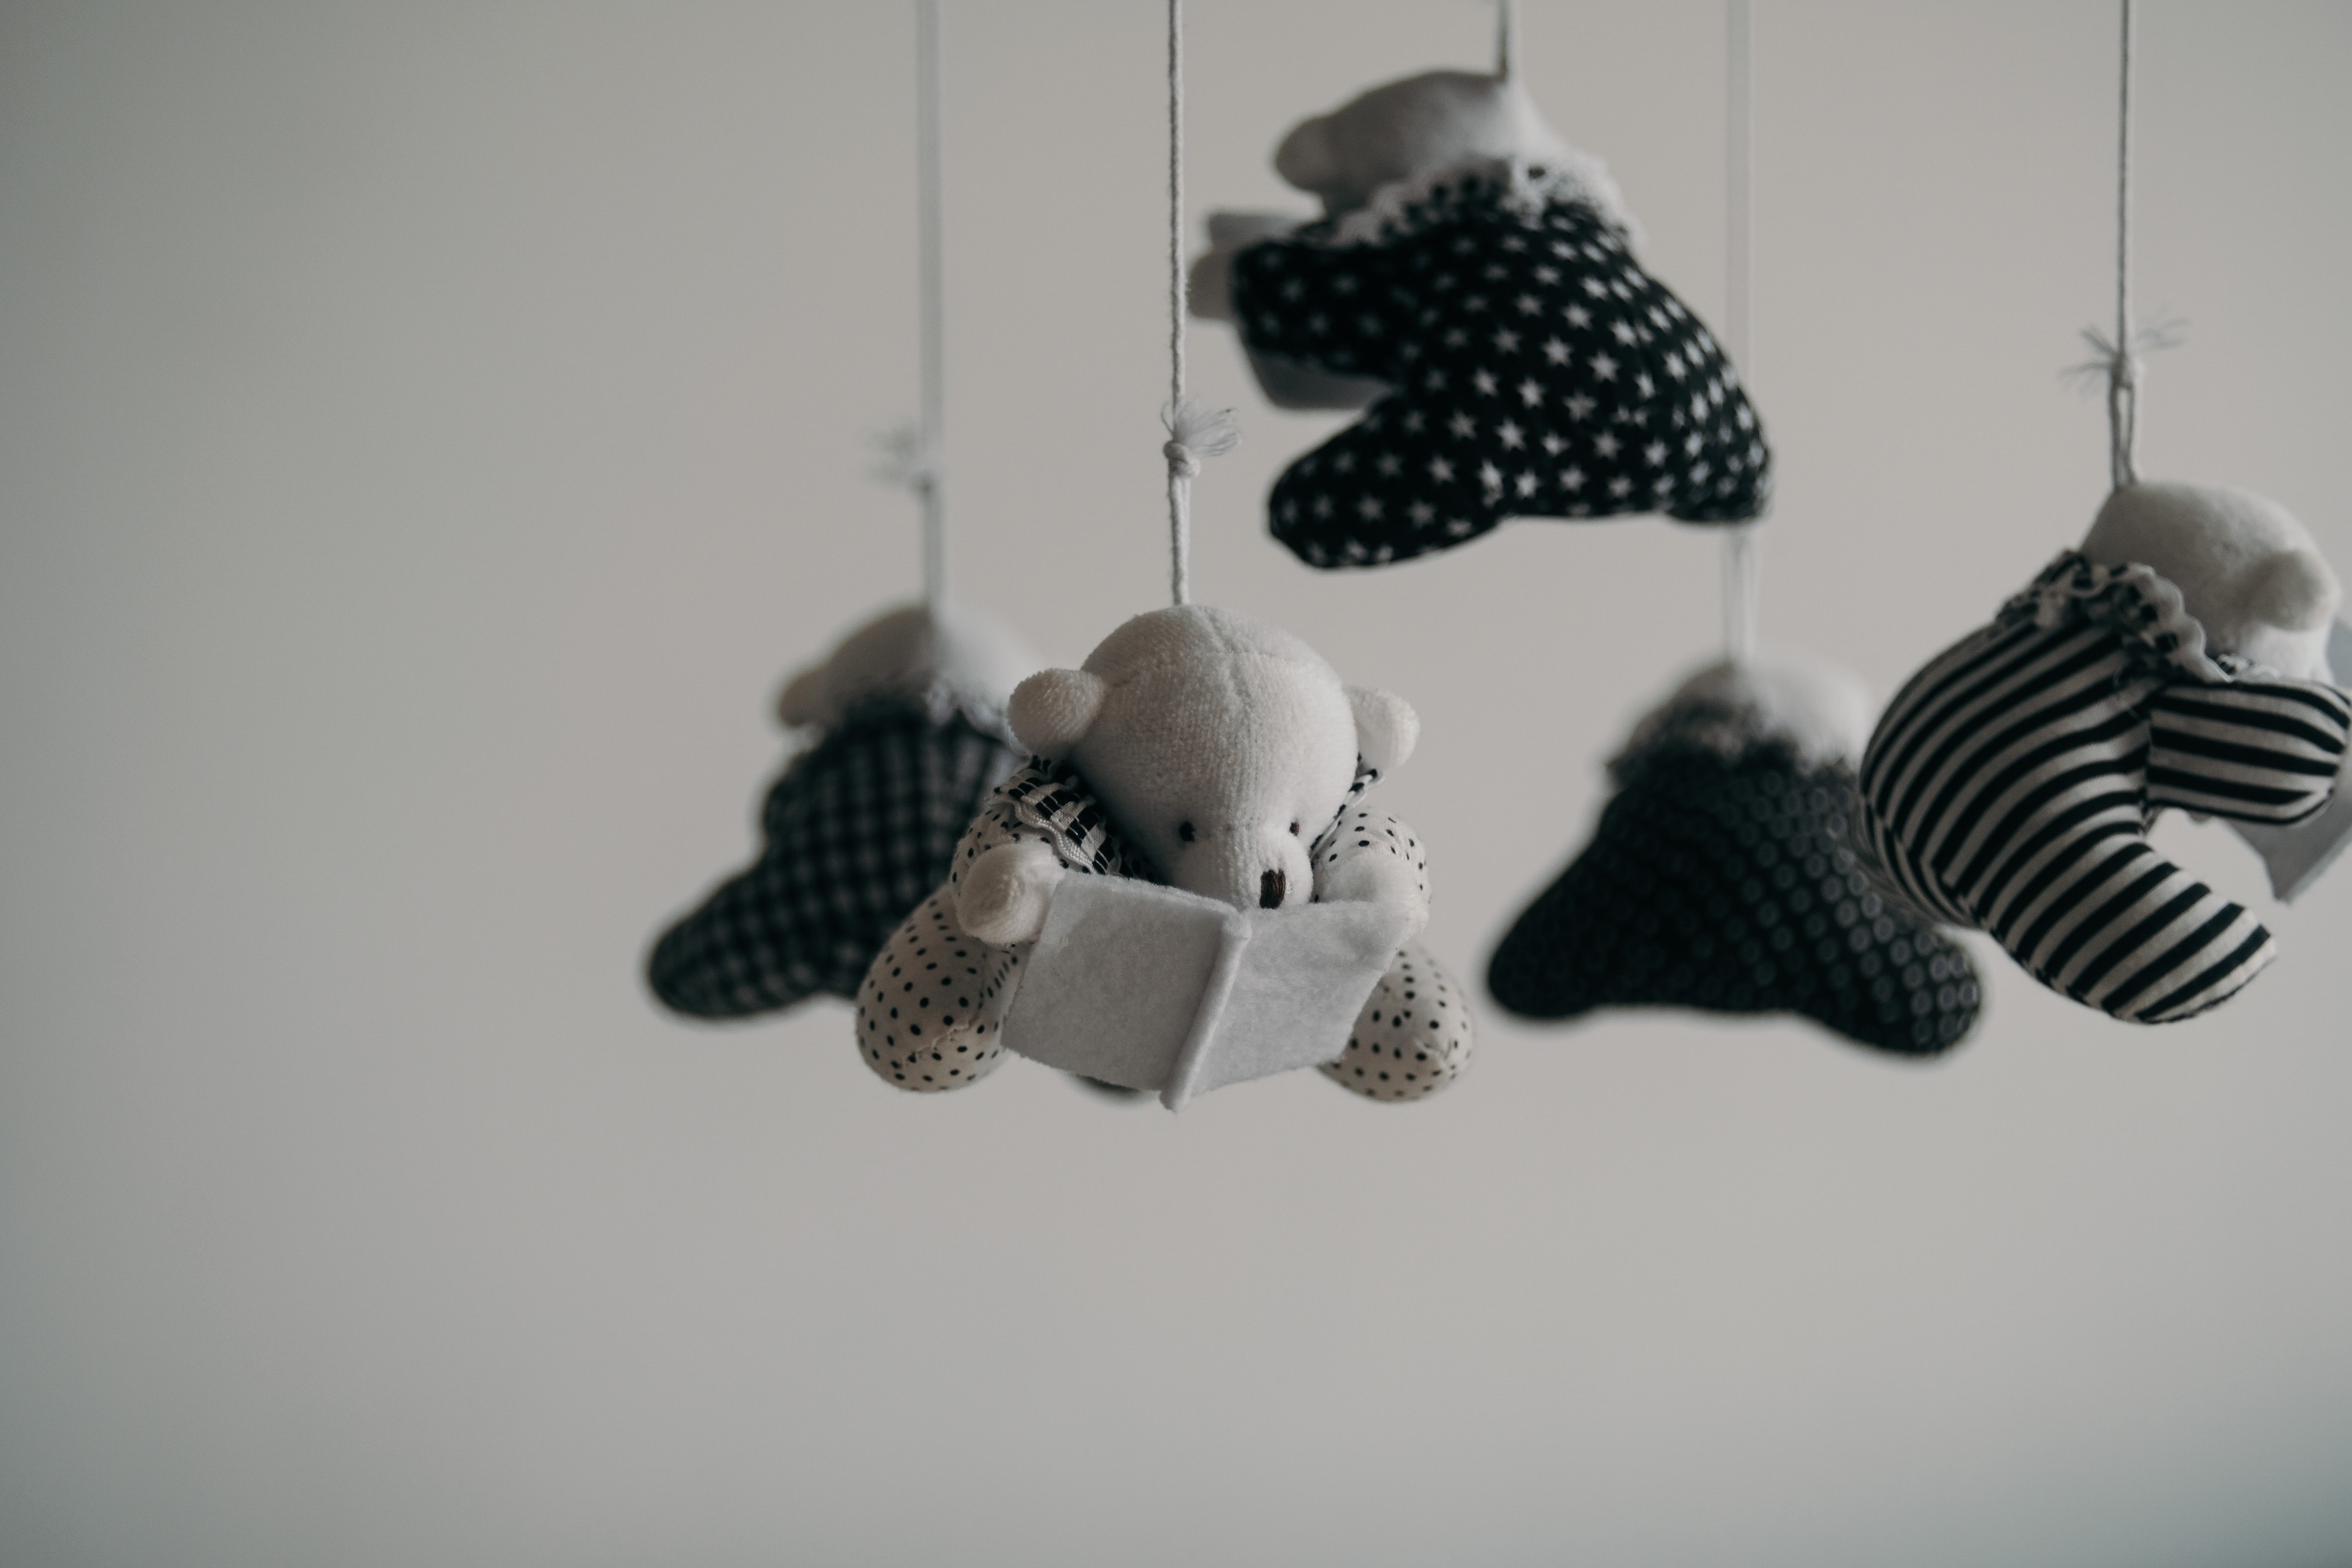 The black and white baby mobile represents the intersection between infertility trauma and racial trauma.